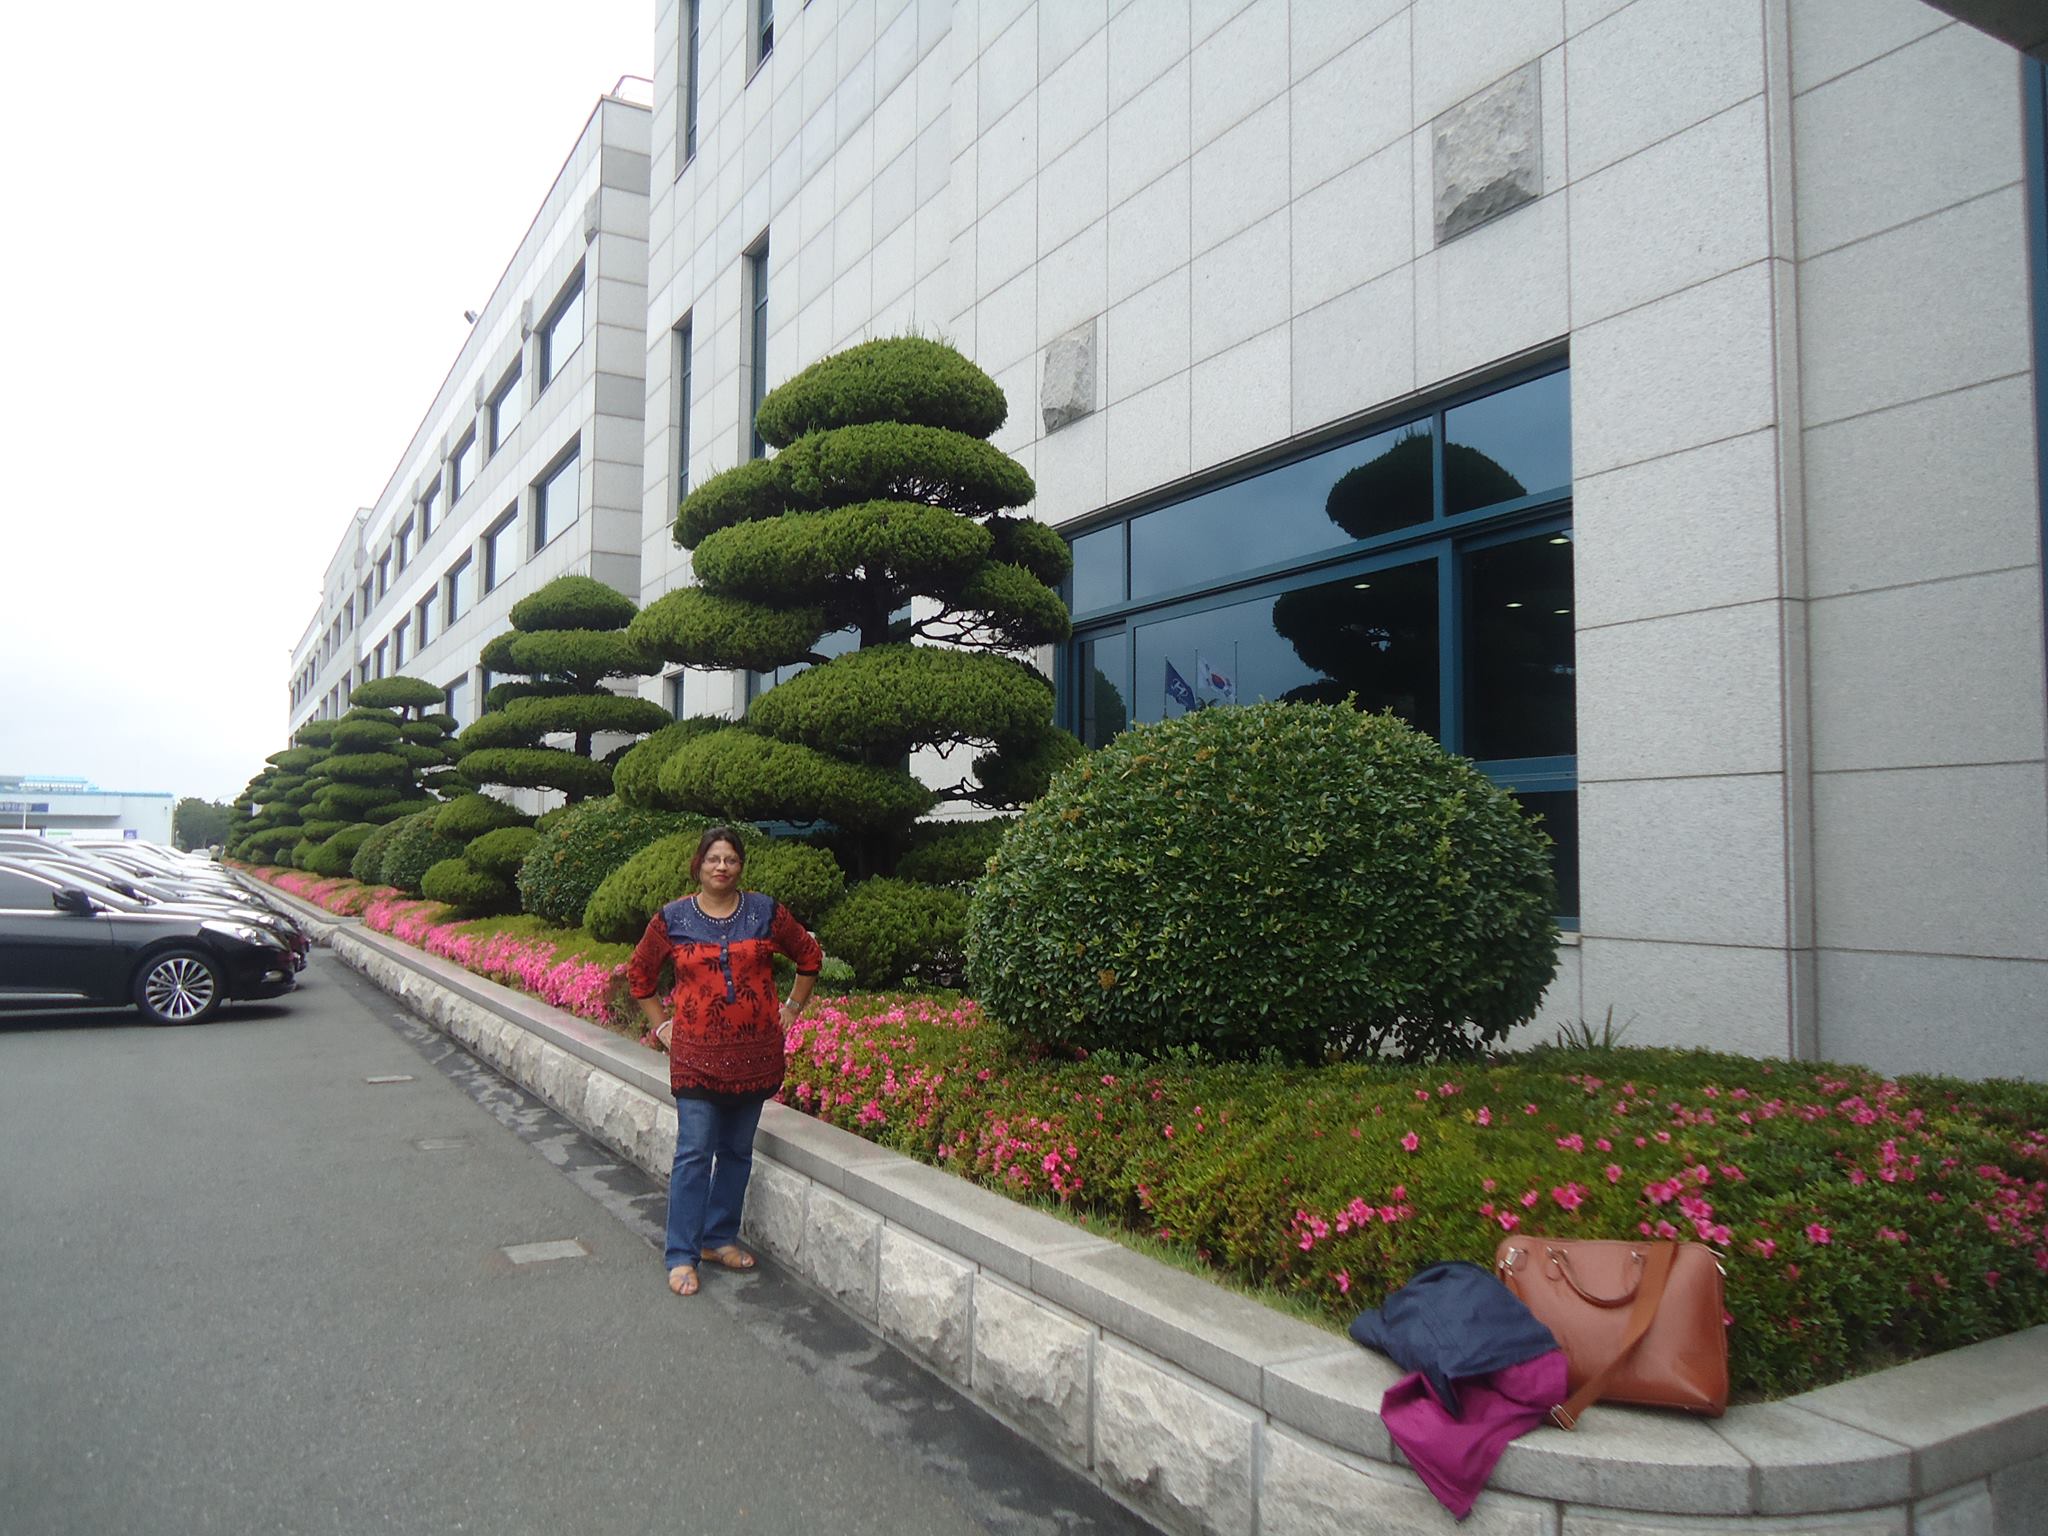 The Hyundai Automobile Company in Seoul, the place worth to photograph.